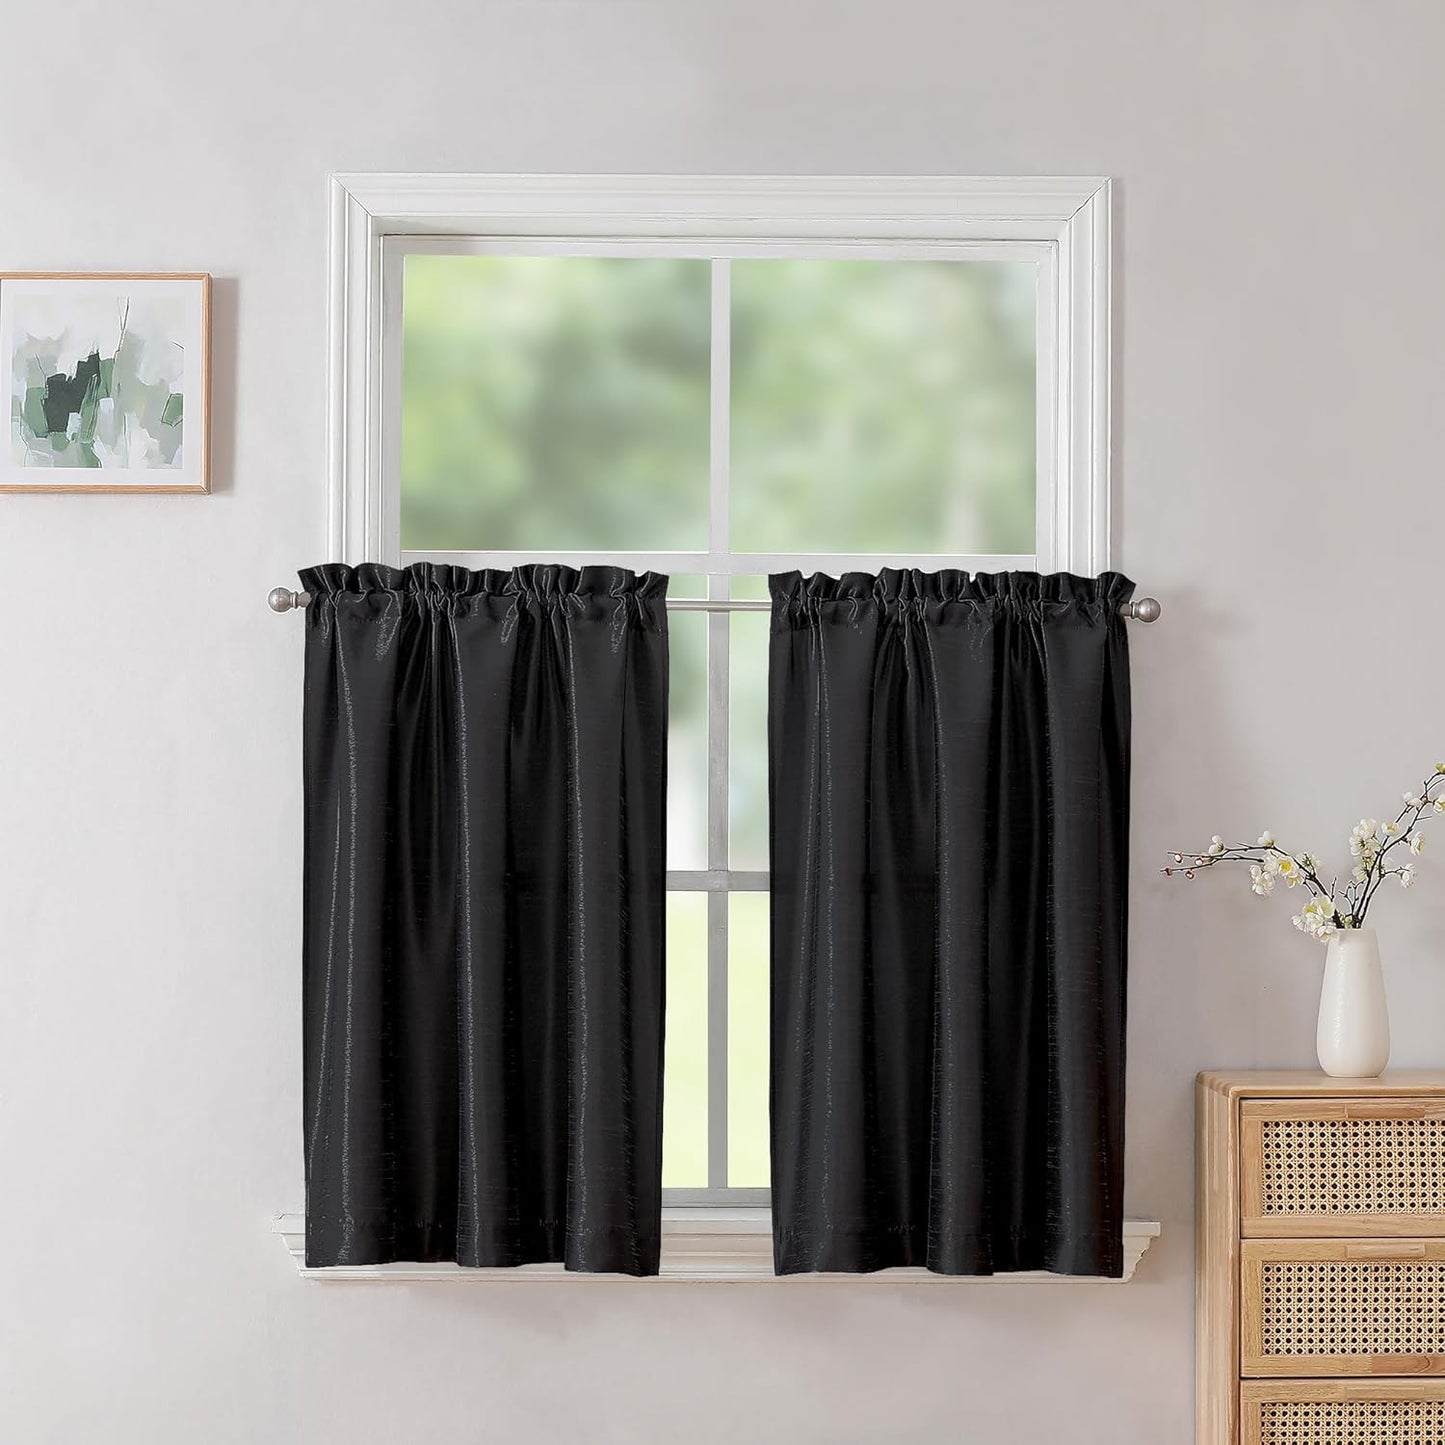 Chyhomenyc Uptown Sage Green Kitchen Curtains 45 Inch Length 2 Panels, Room Darkening Faux Silk Chic Fabric Short Window Curtains for Bedroom Living Room, Each 30Wx45L  Chyhomenyc Black 2X30"Wx24"L 